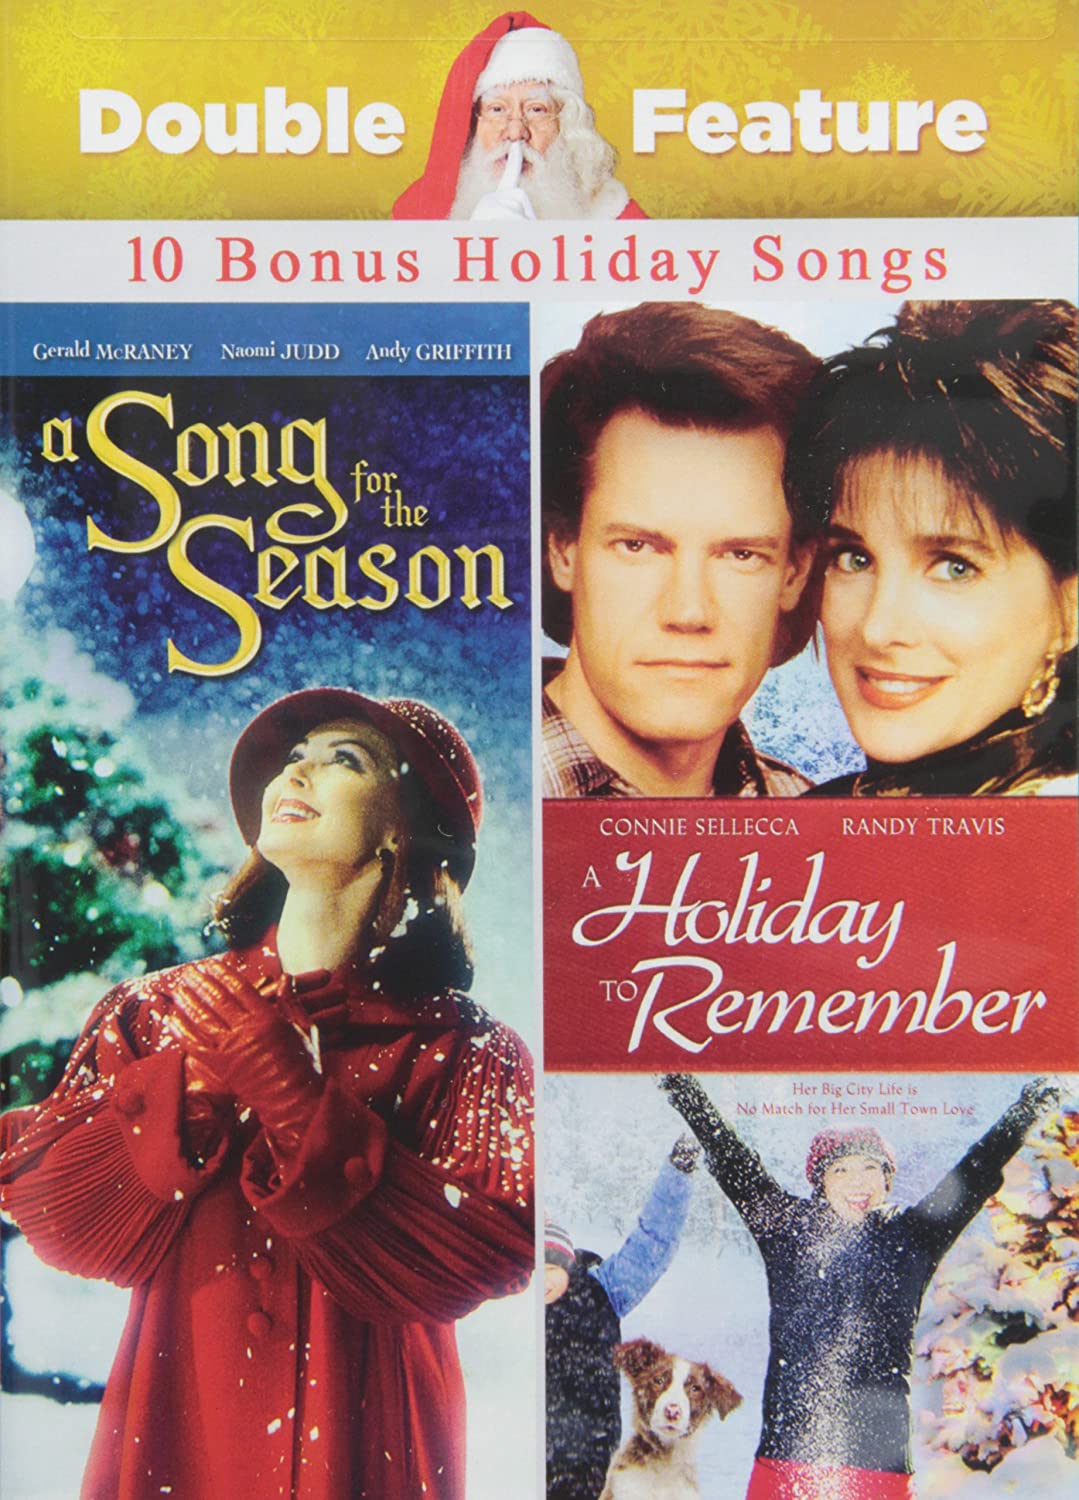 A song for the season; A holiday to remember